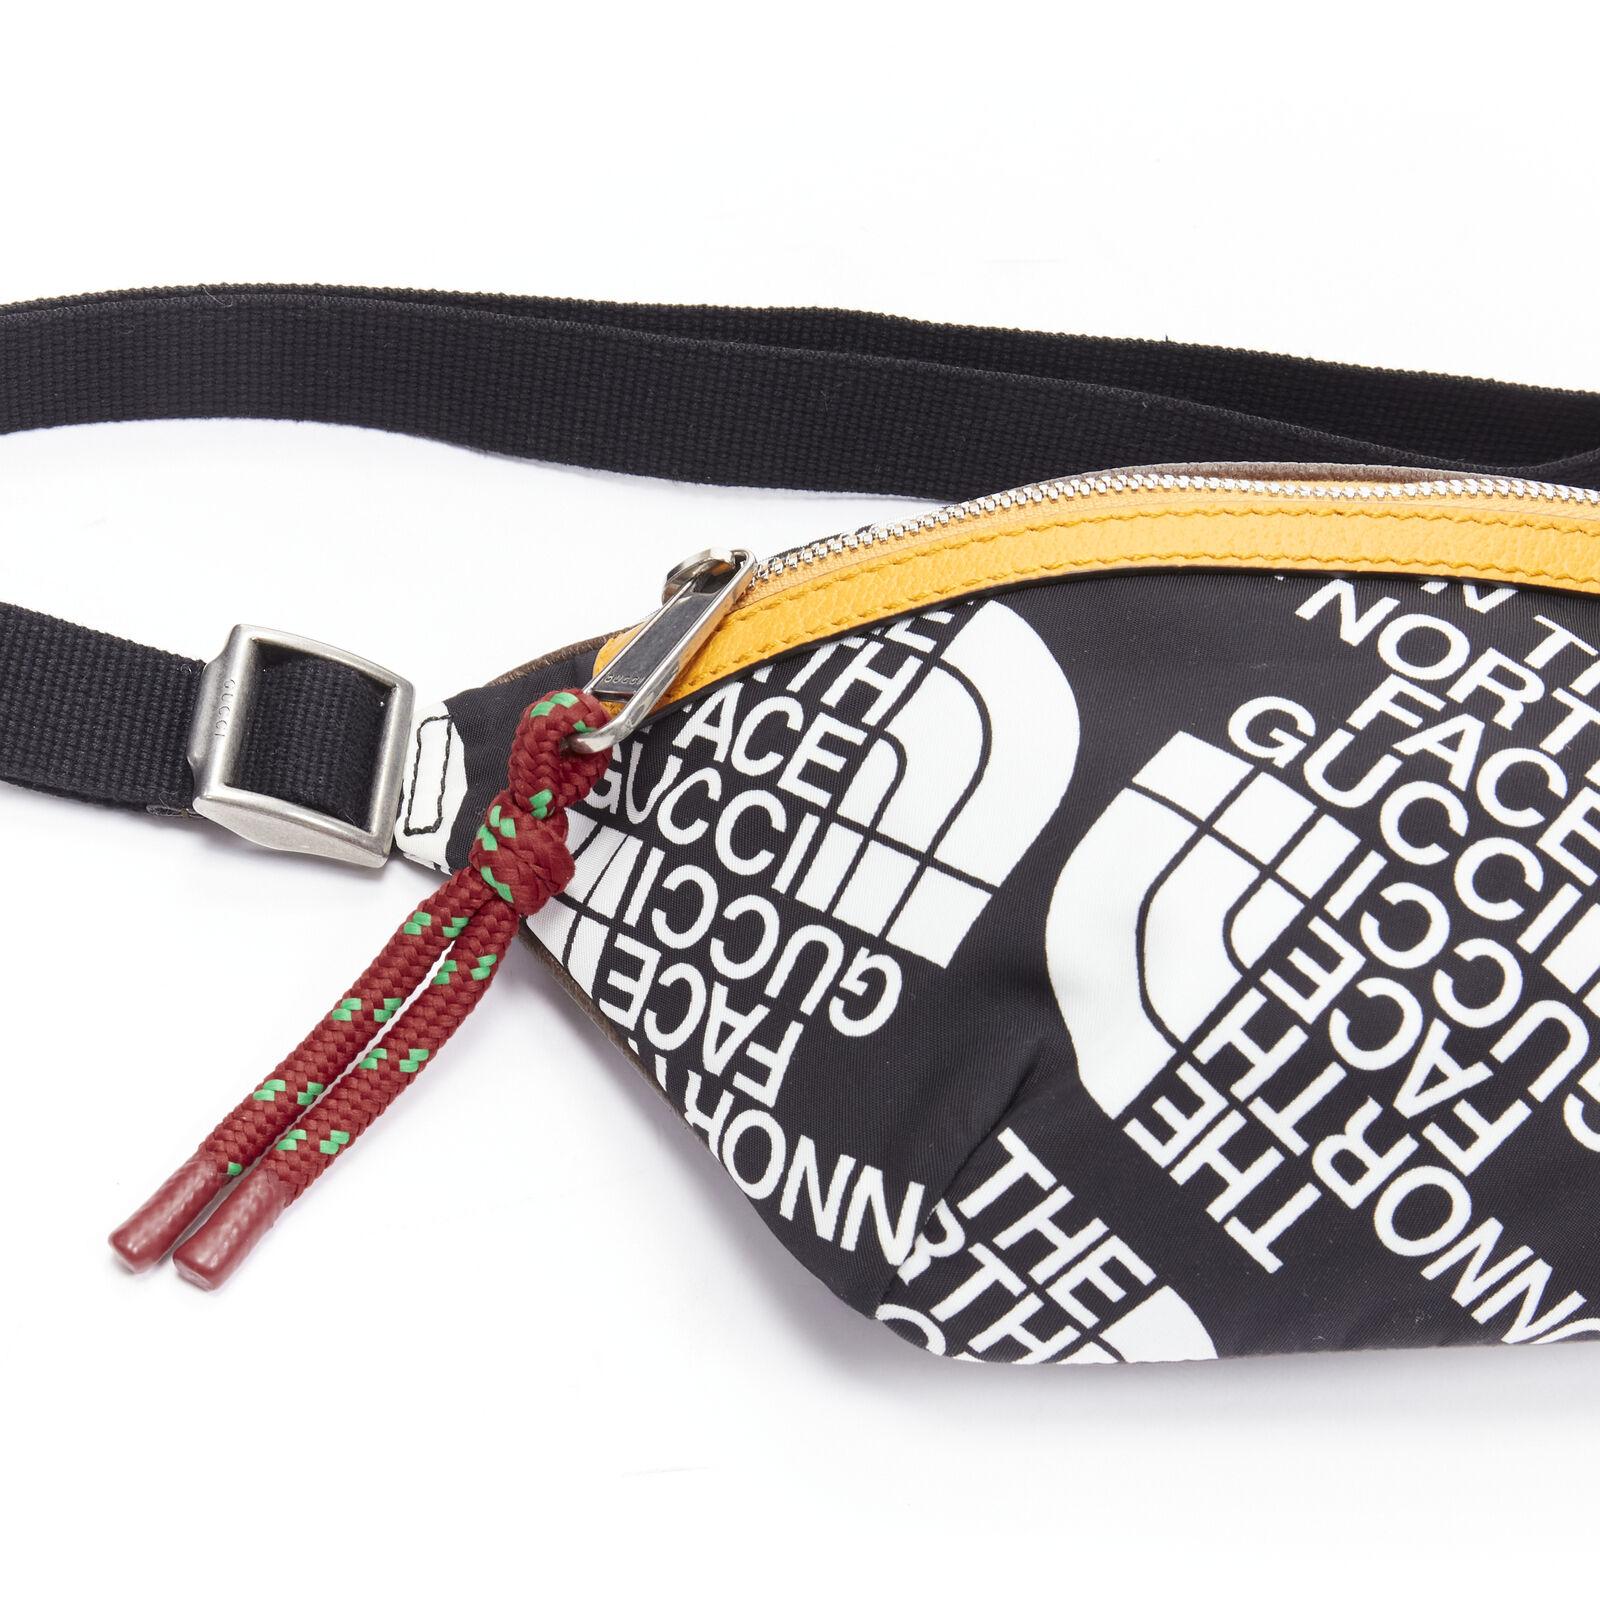 GUCCI The North Face black white monogram yellow zip belted waist bag For Sale 1